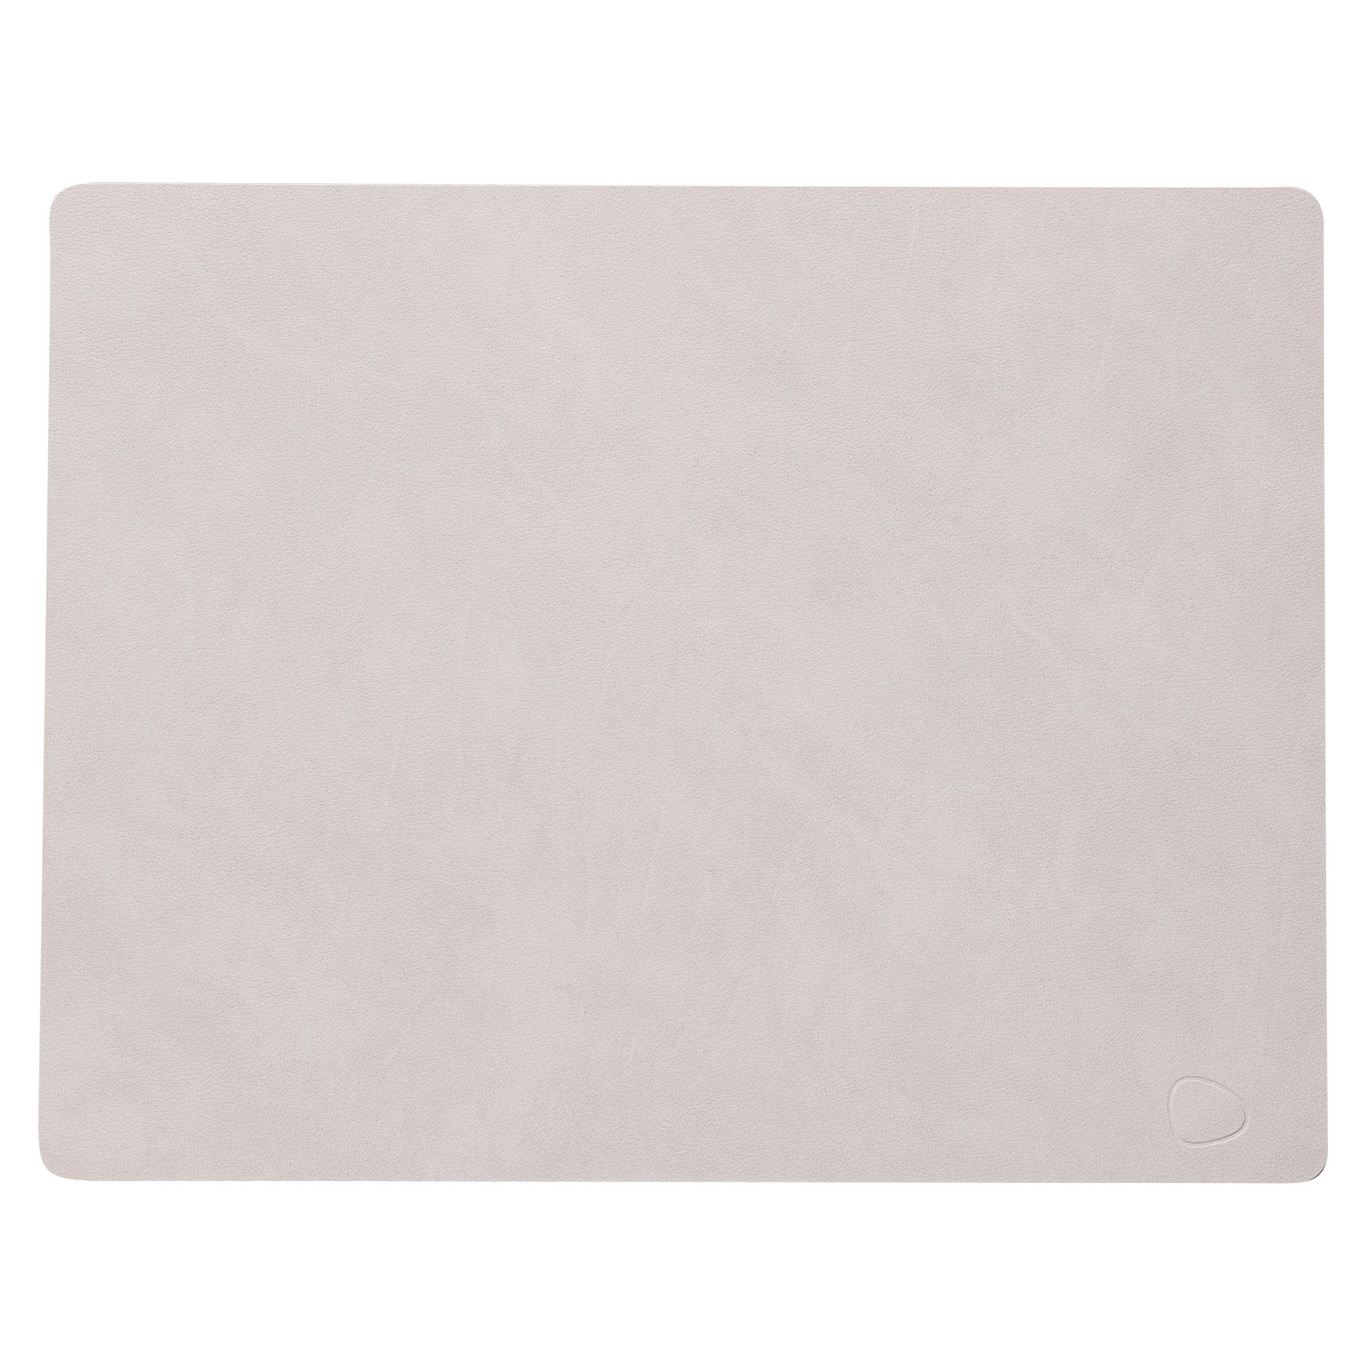 Square L Table Mat Nupo 35x45 cm, Oyster White